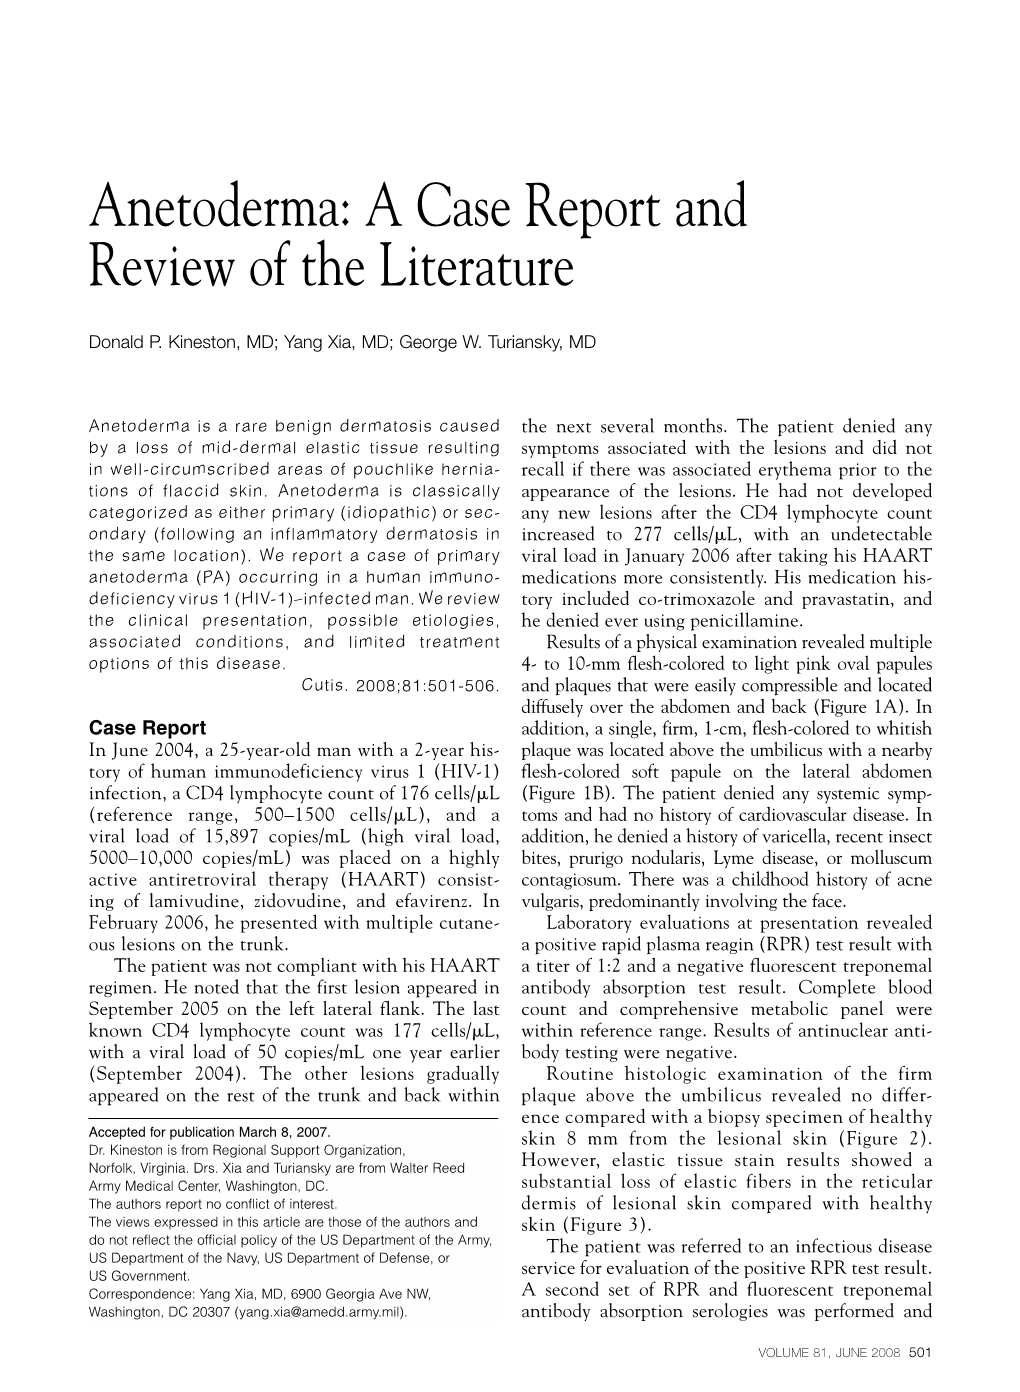 Anetoderma: a Case Report and Review of the Literature